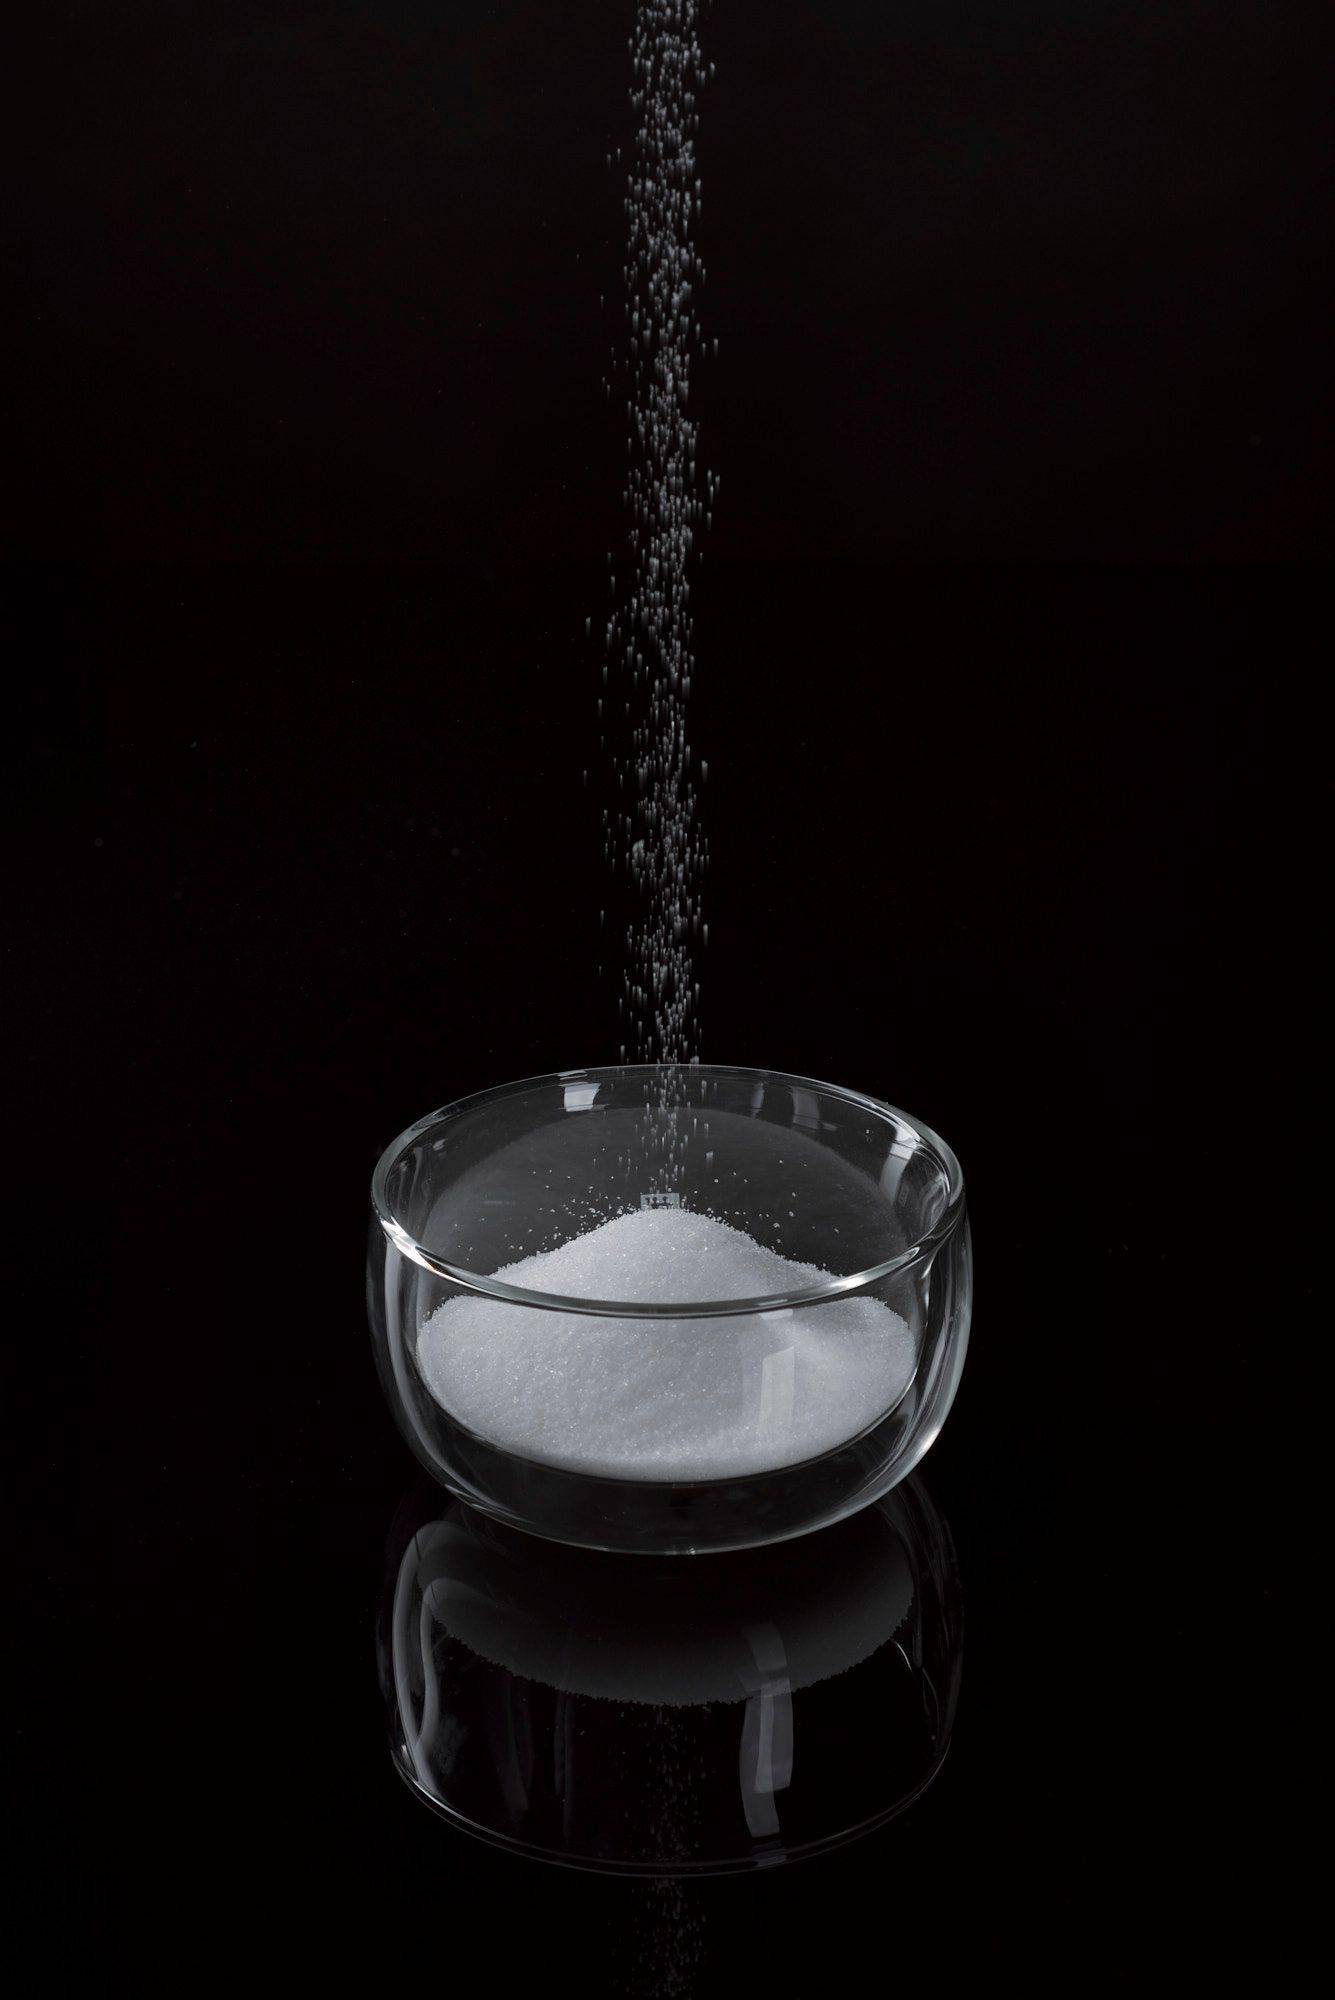 salt and sugar in a glass bowl with black background